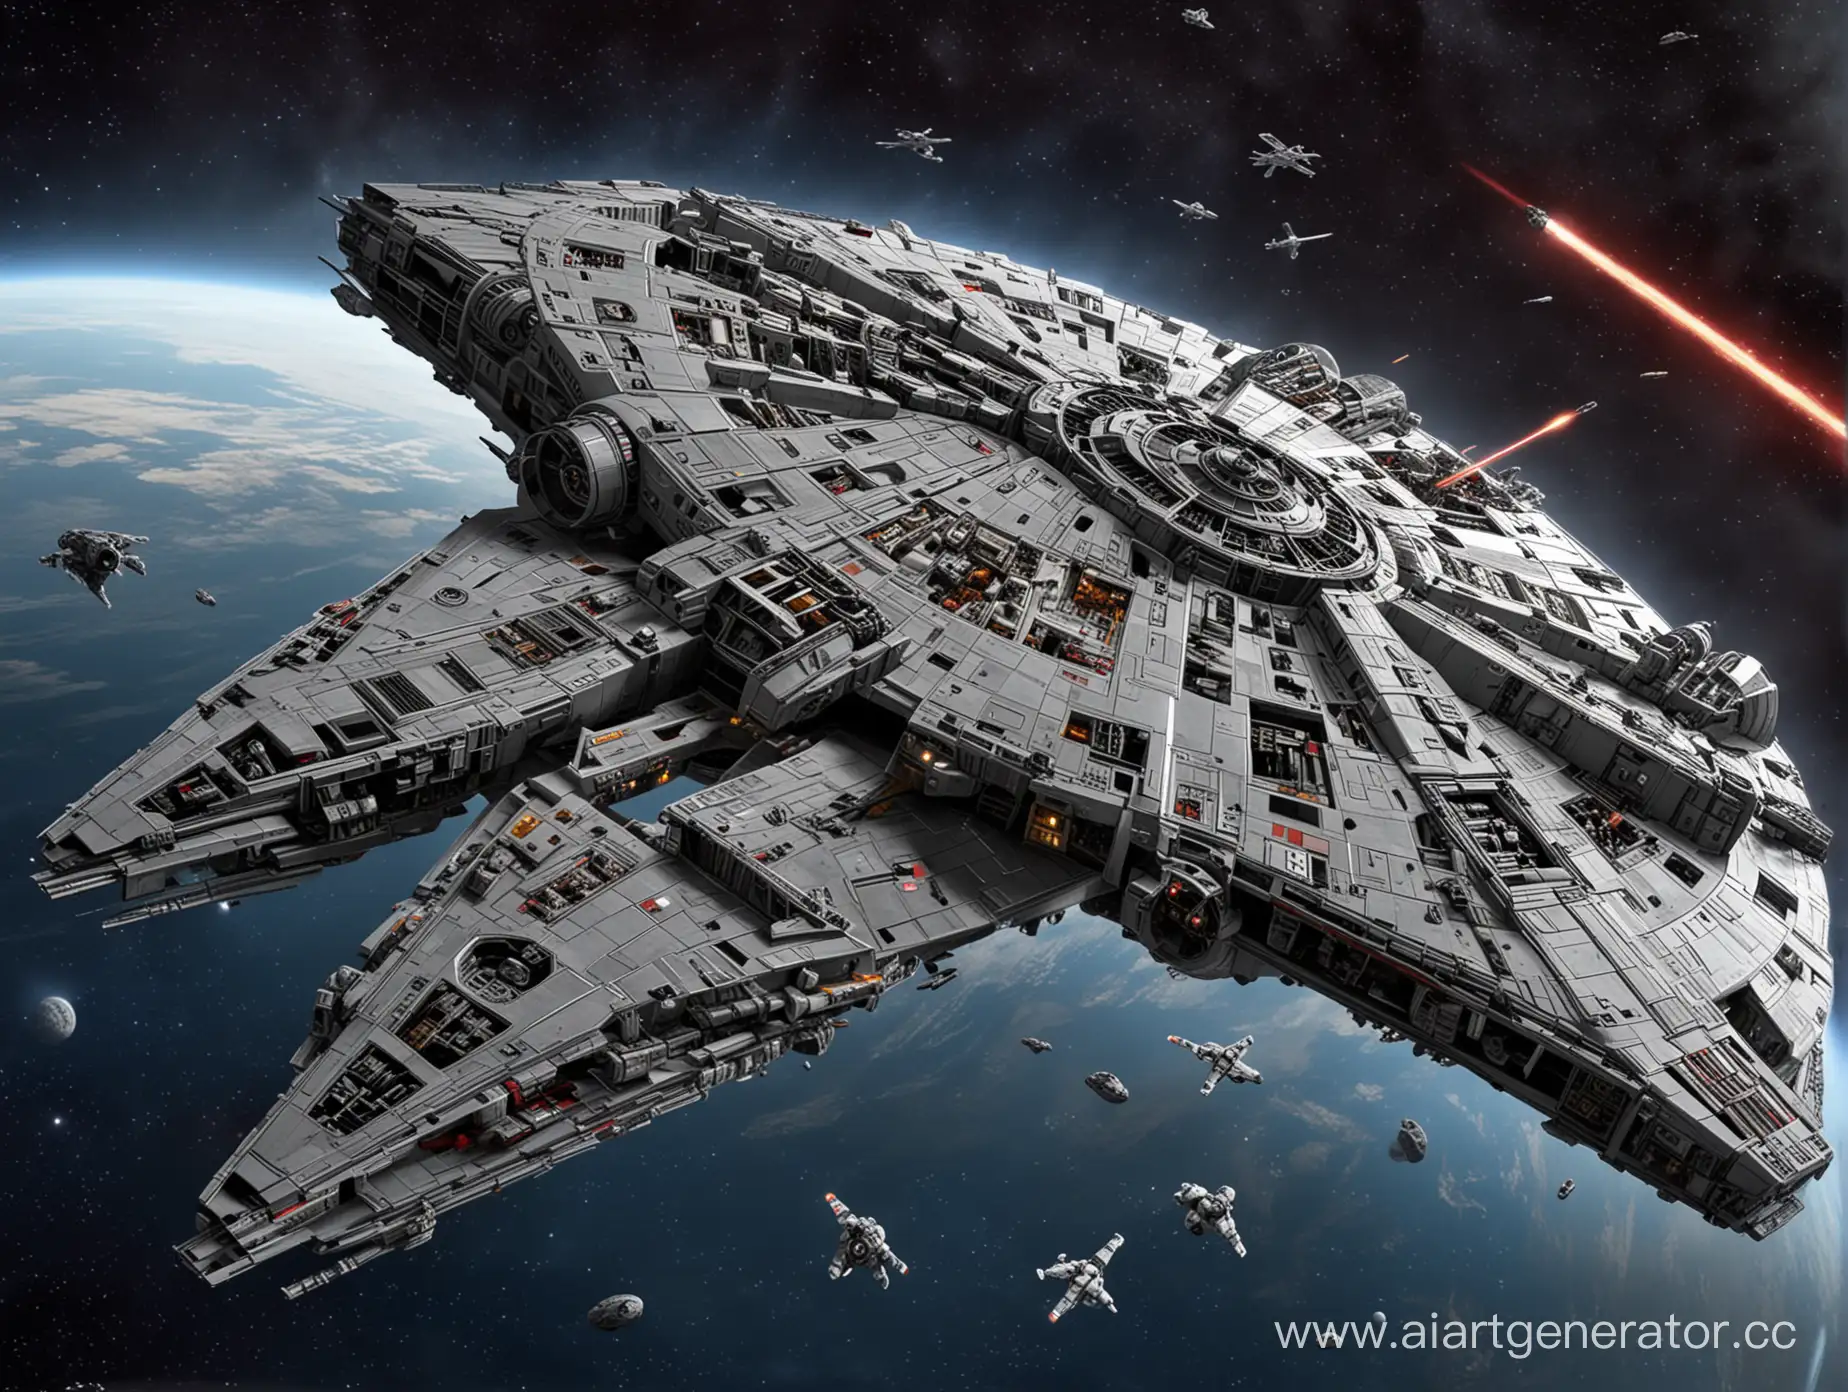 Epic-Star-Wars-Battle-in-the-Cosmos-Millennium-Falcon-in-Action